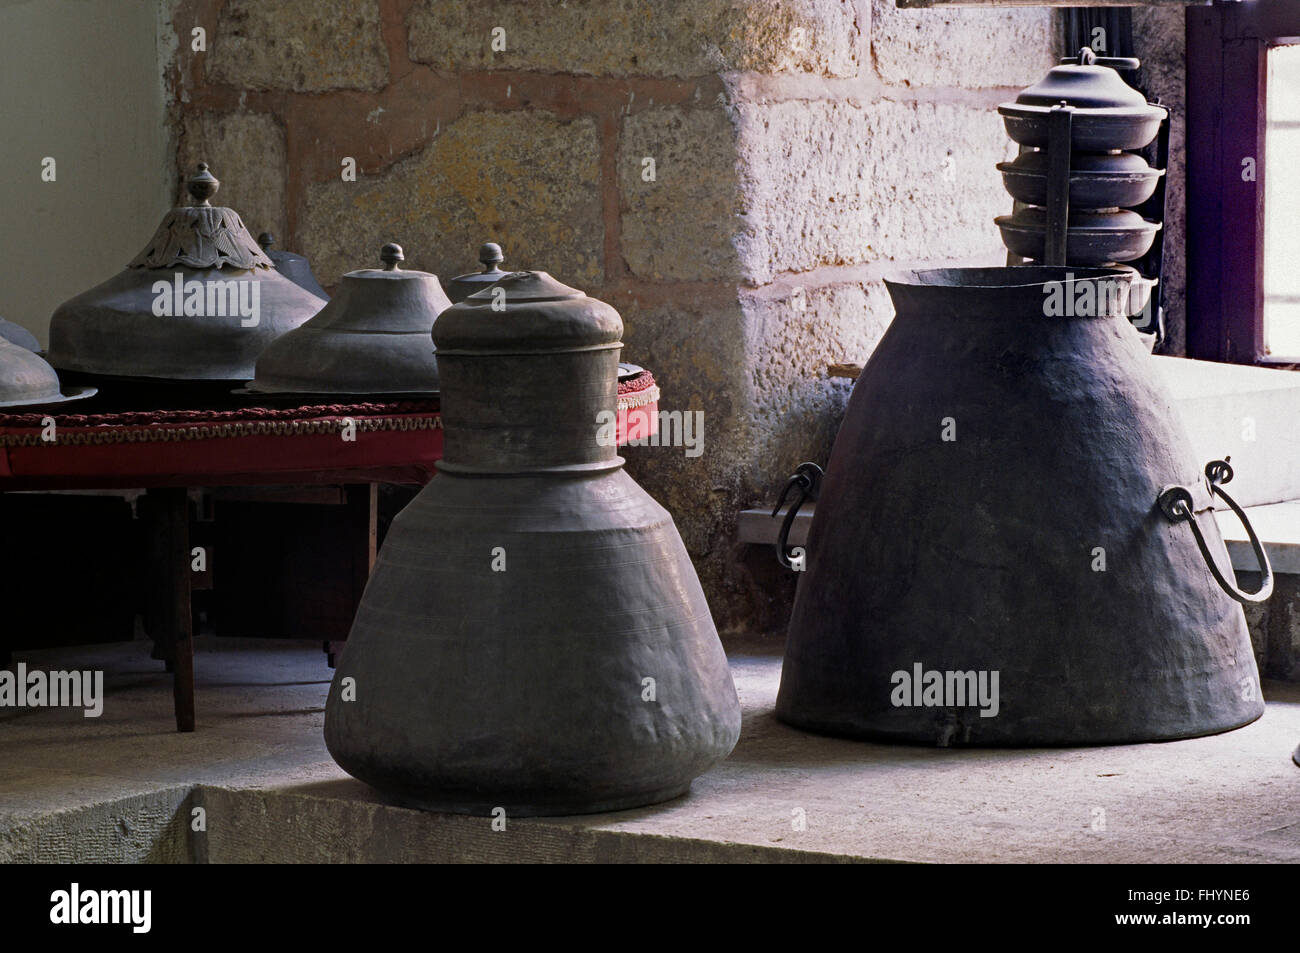 Iron pots & vessels from one of the many kitchens of Topkapi Palace (Ottoman Empire) - Istanbul, Turkey Stock Photo